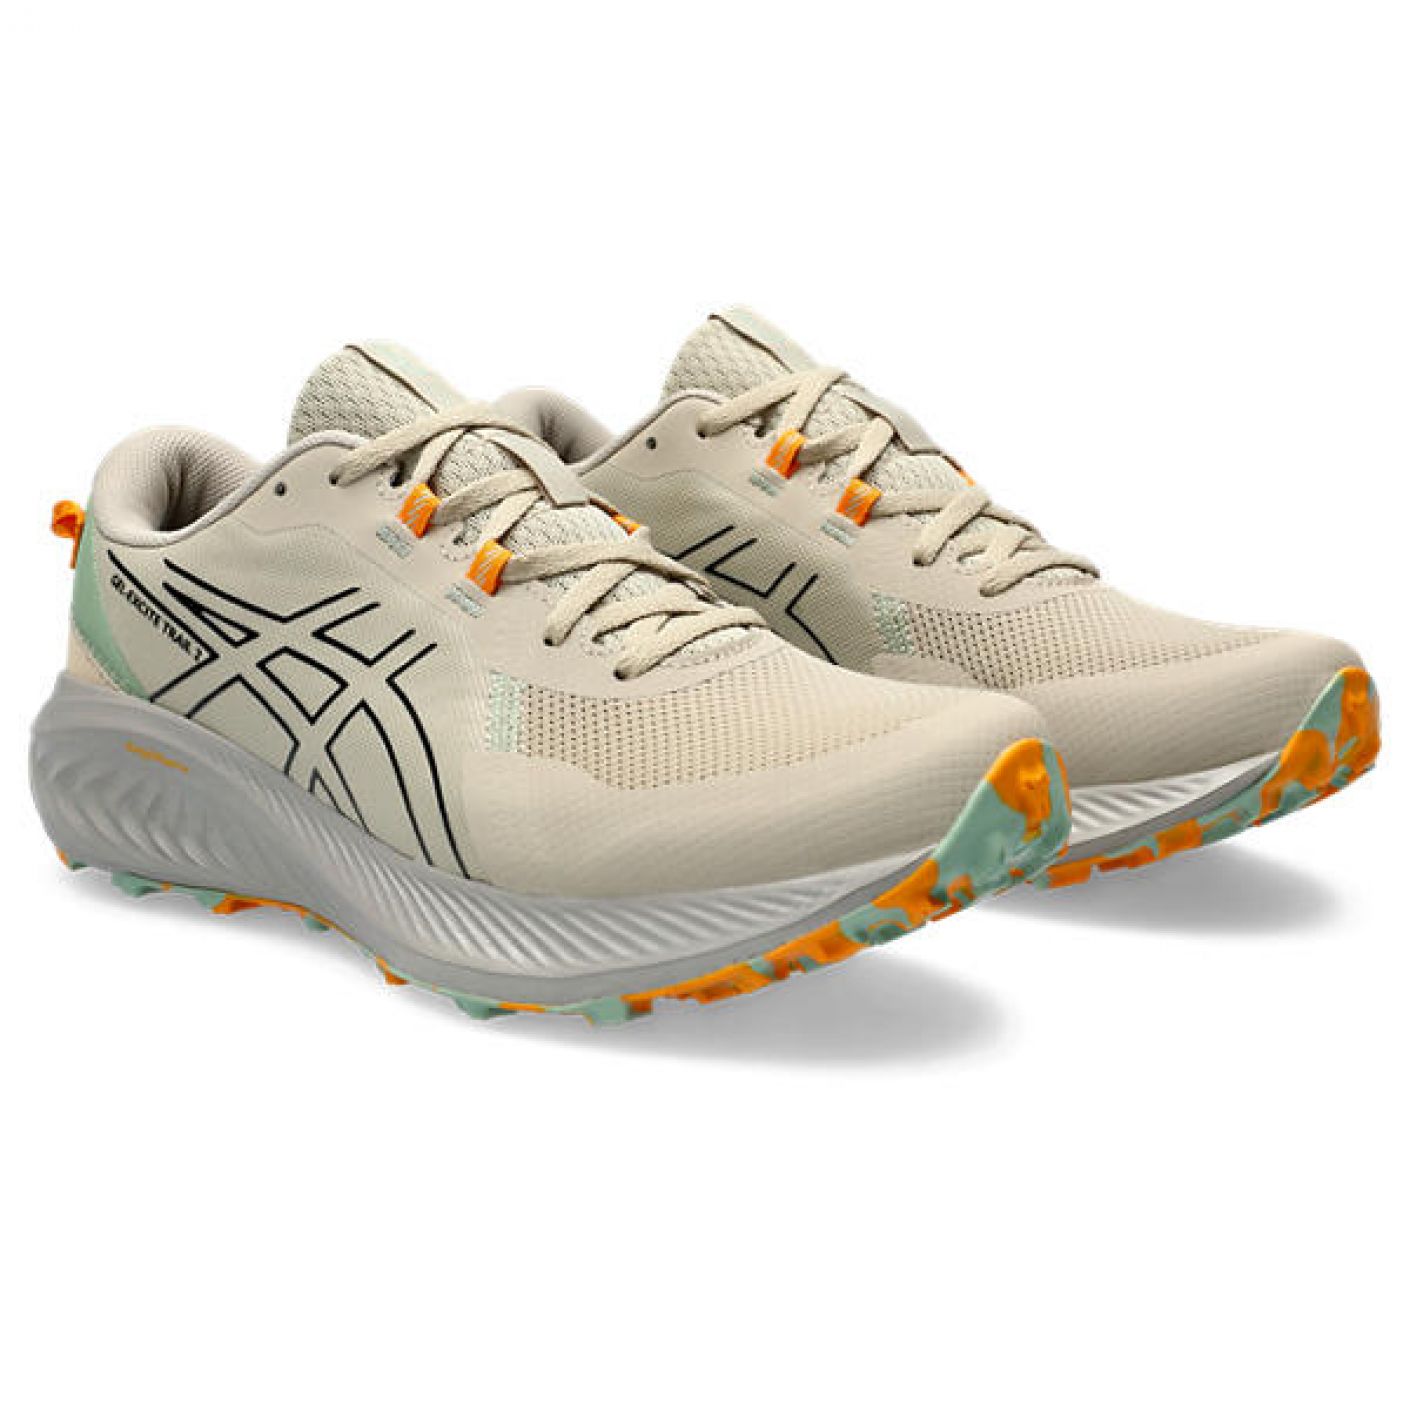 Asics Gel Excite Trail 2 Feather Grey/Black for Men